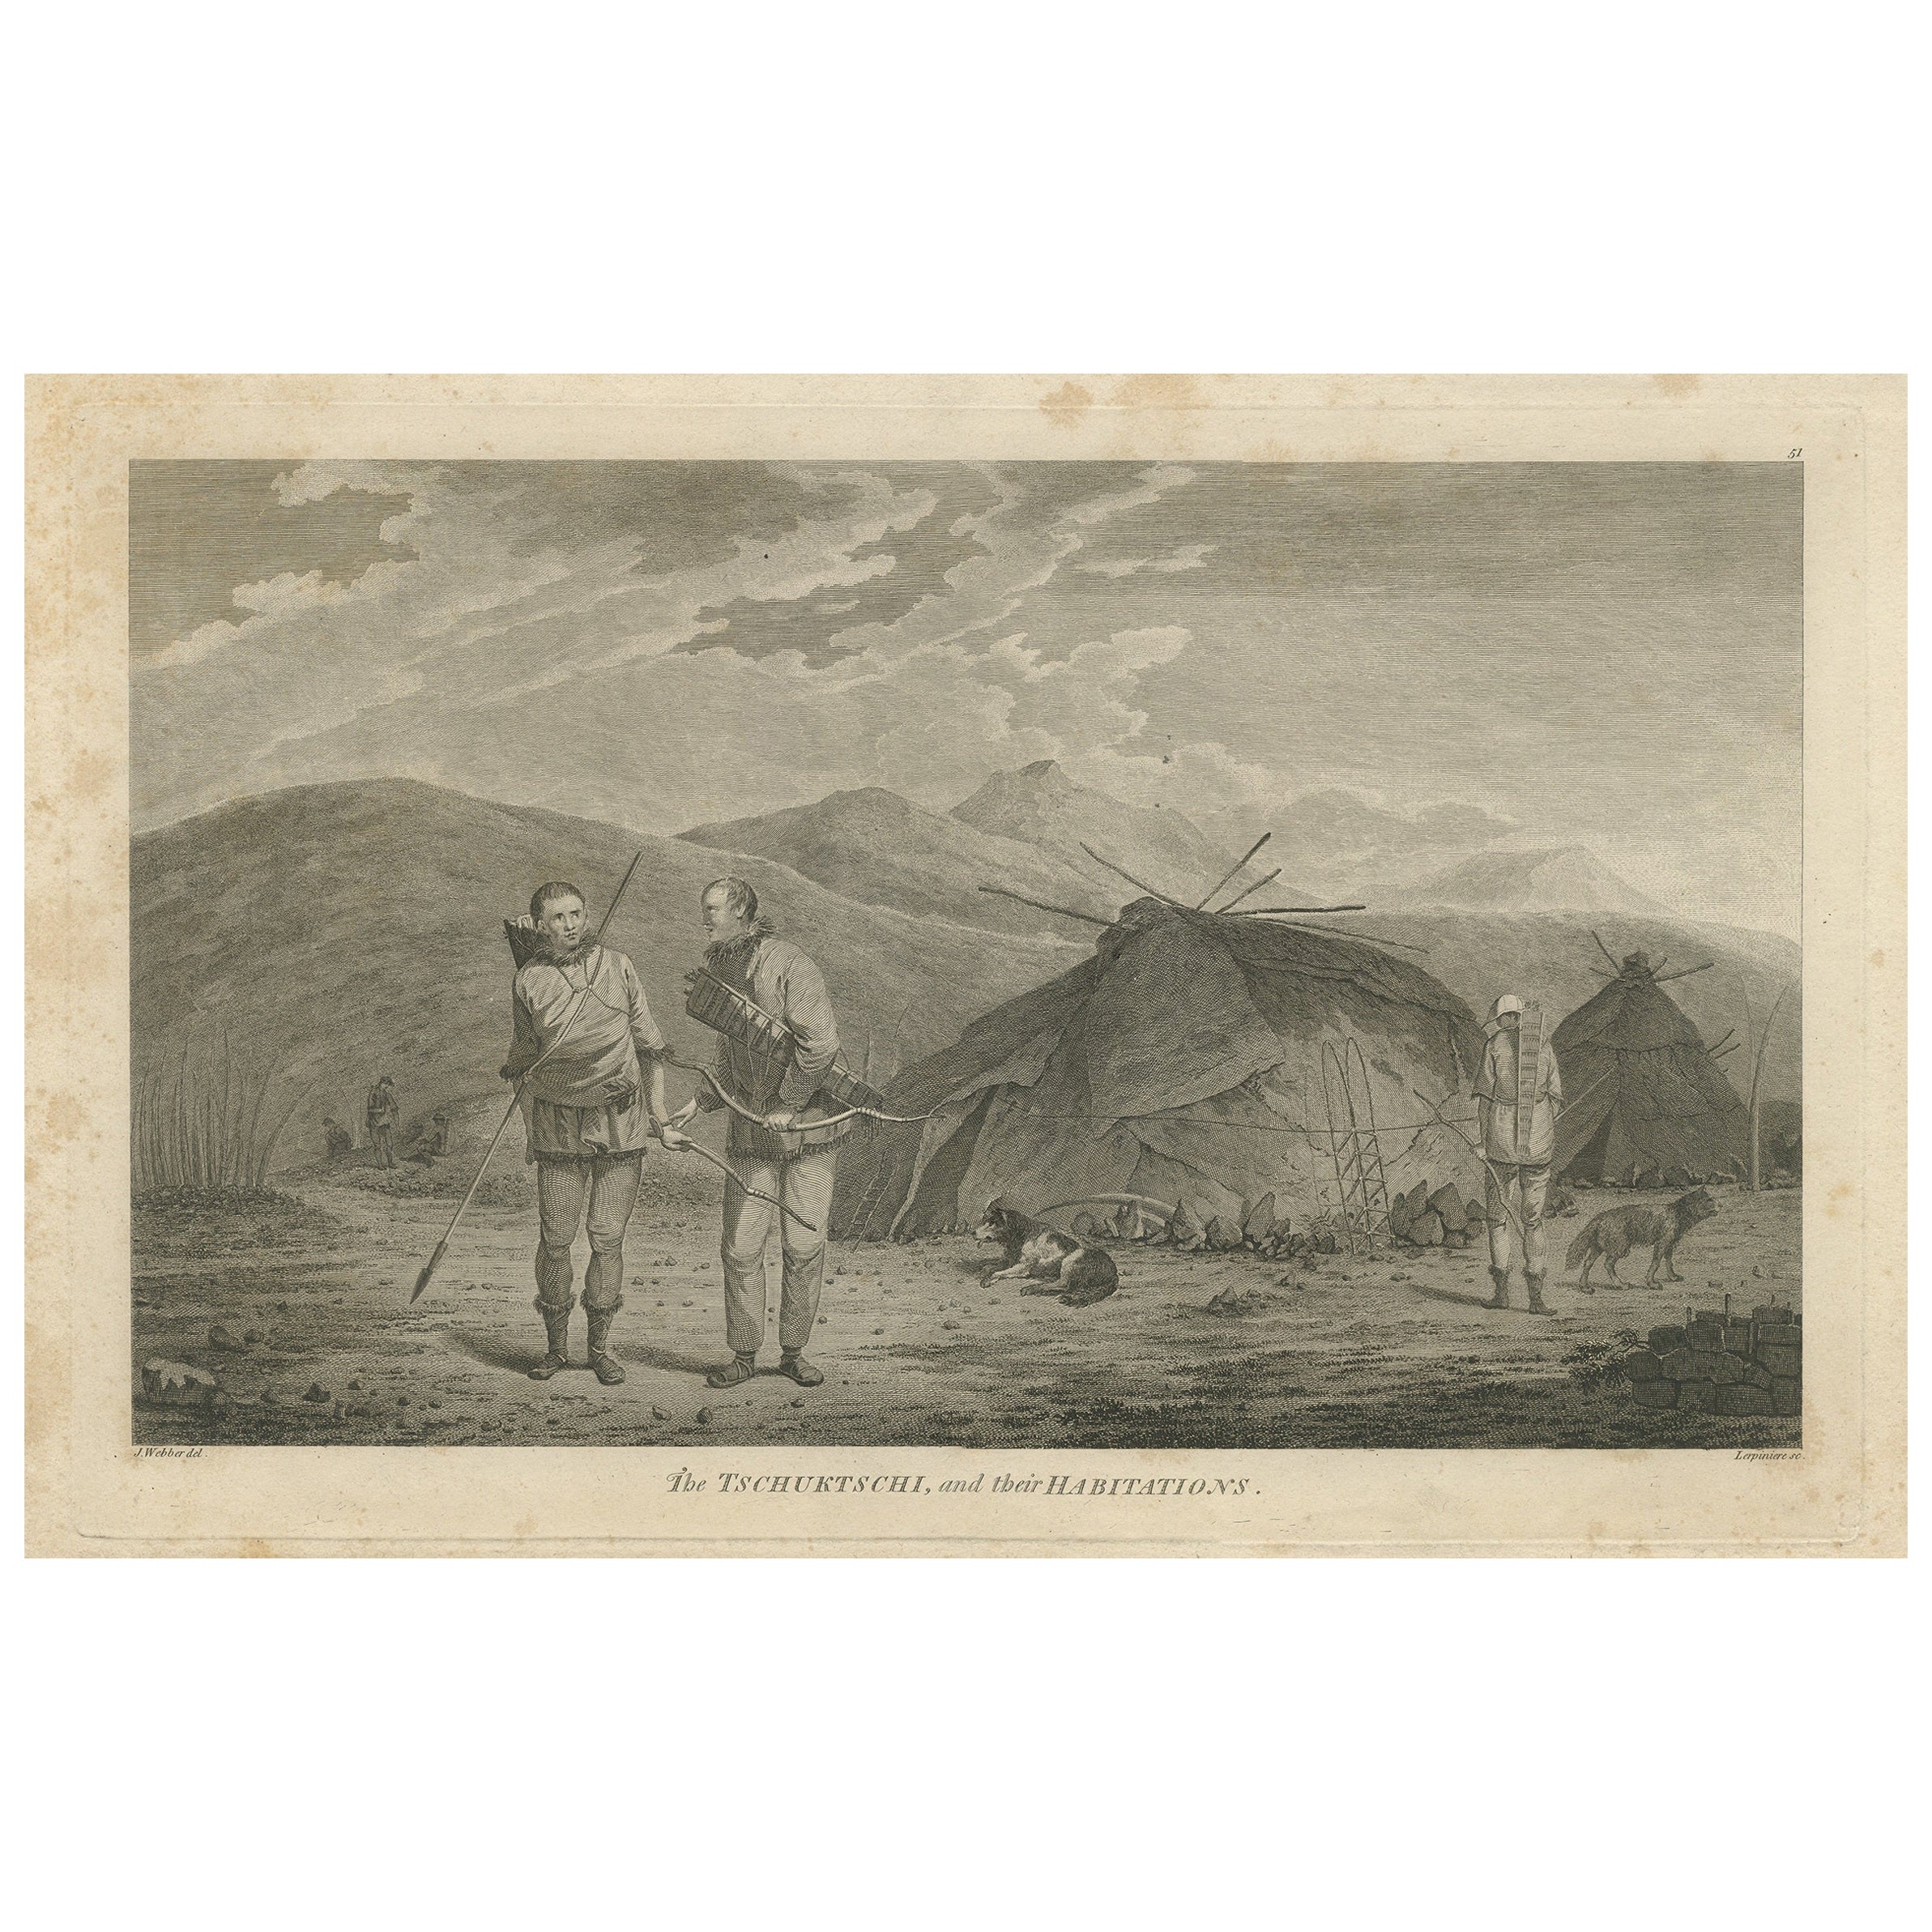 Antique Print of Chukchi Men and Their Habitations in Siberia